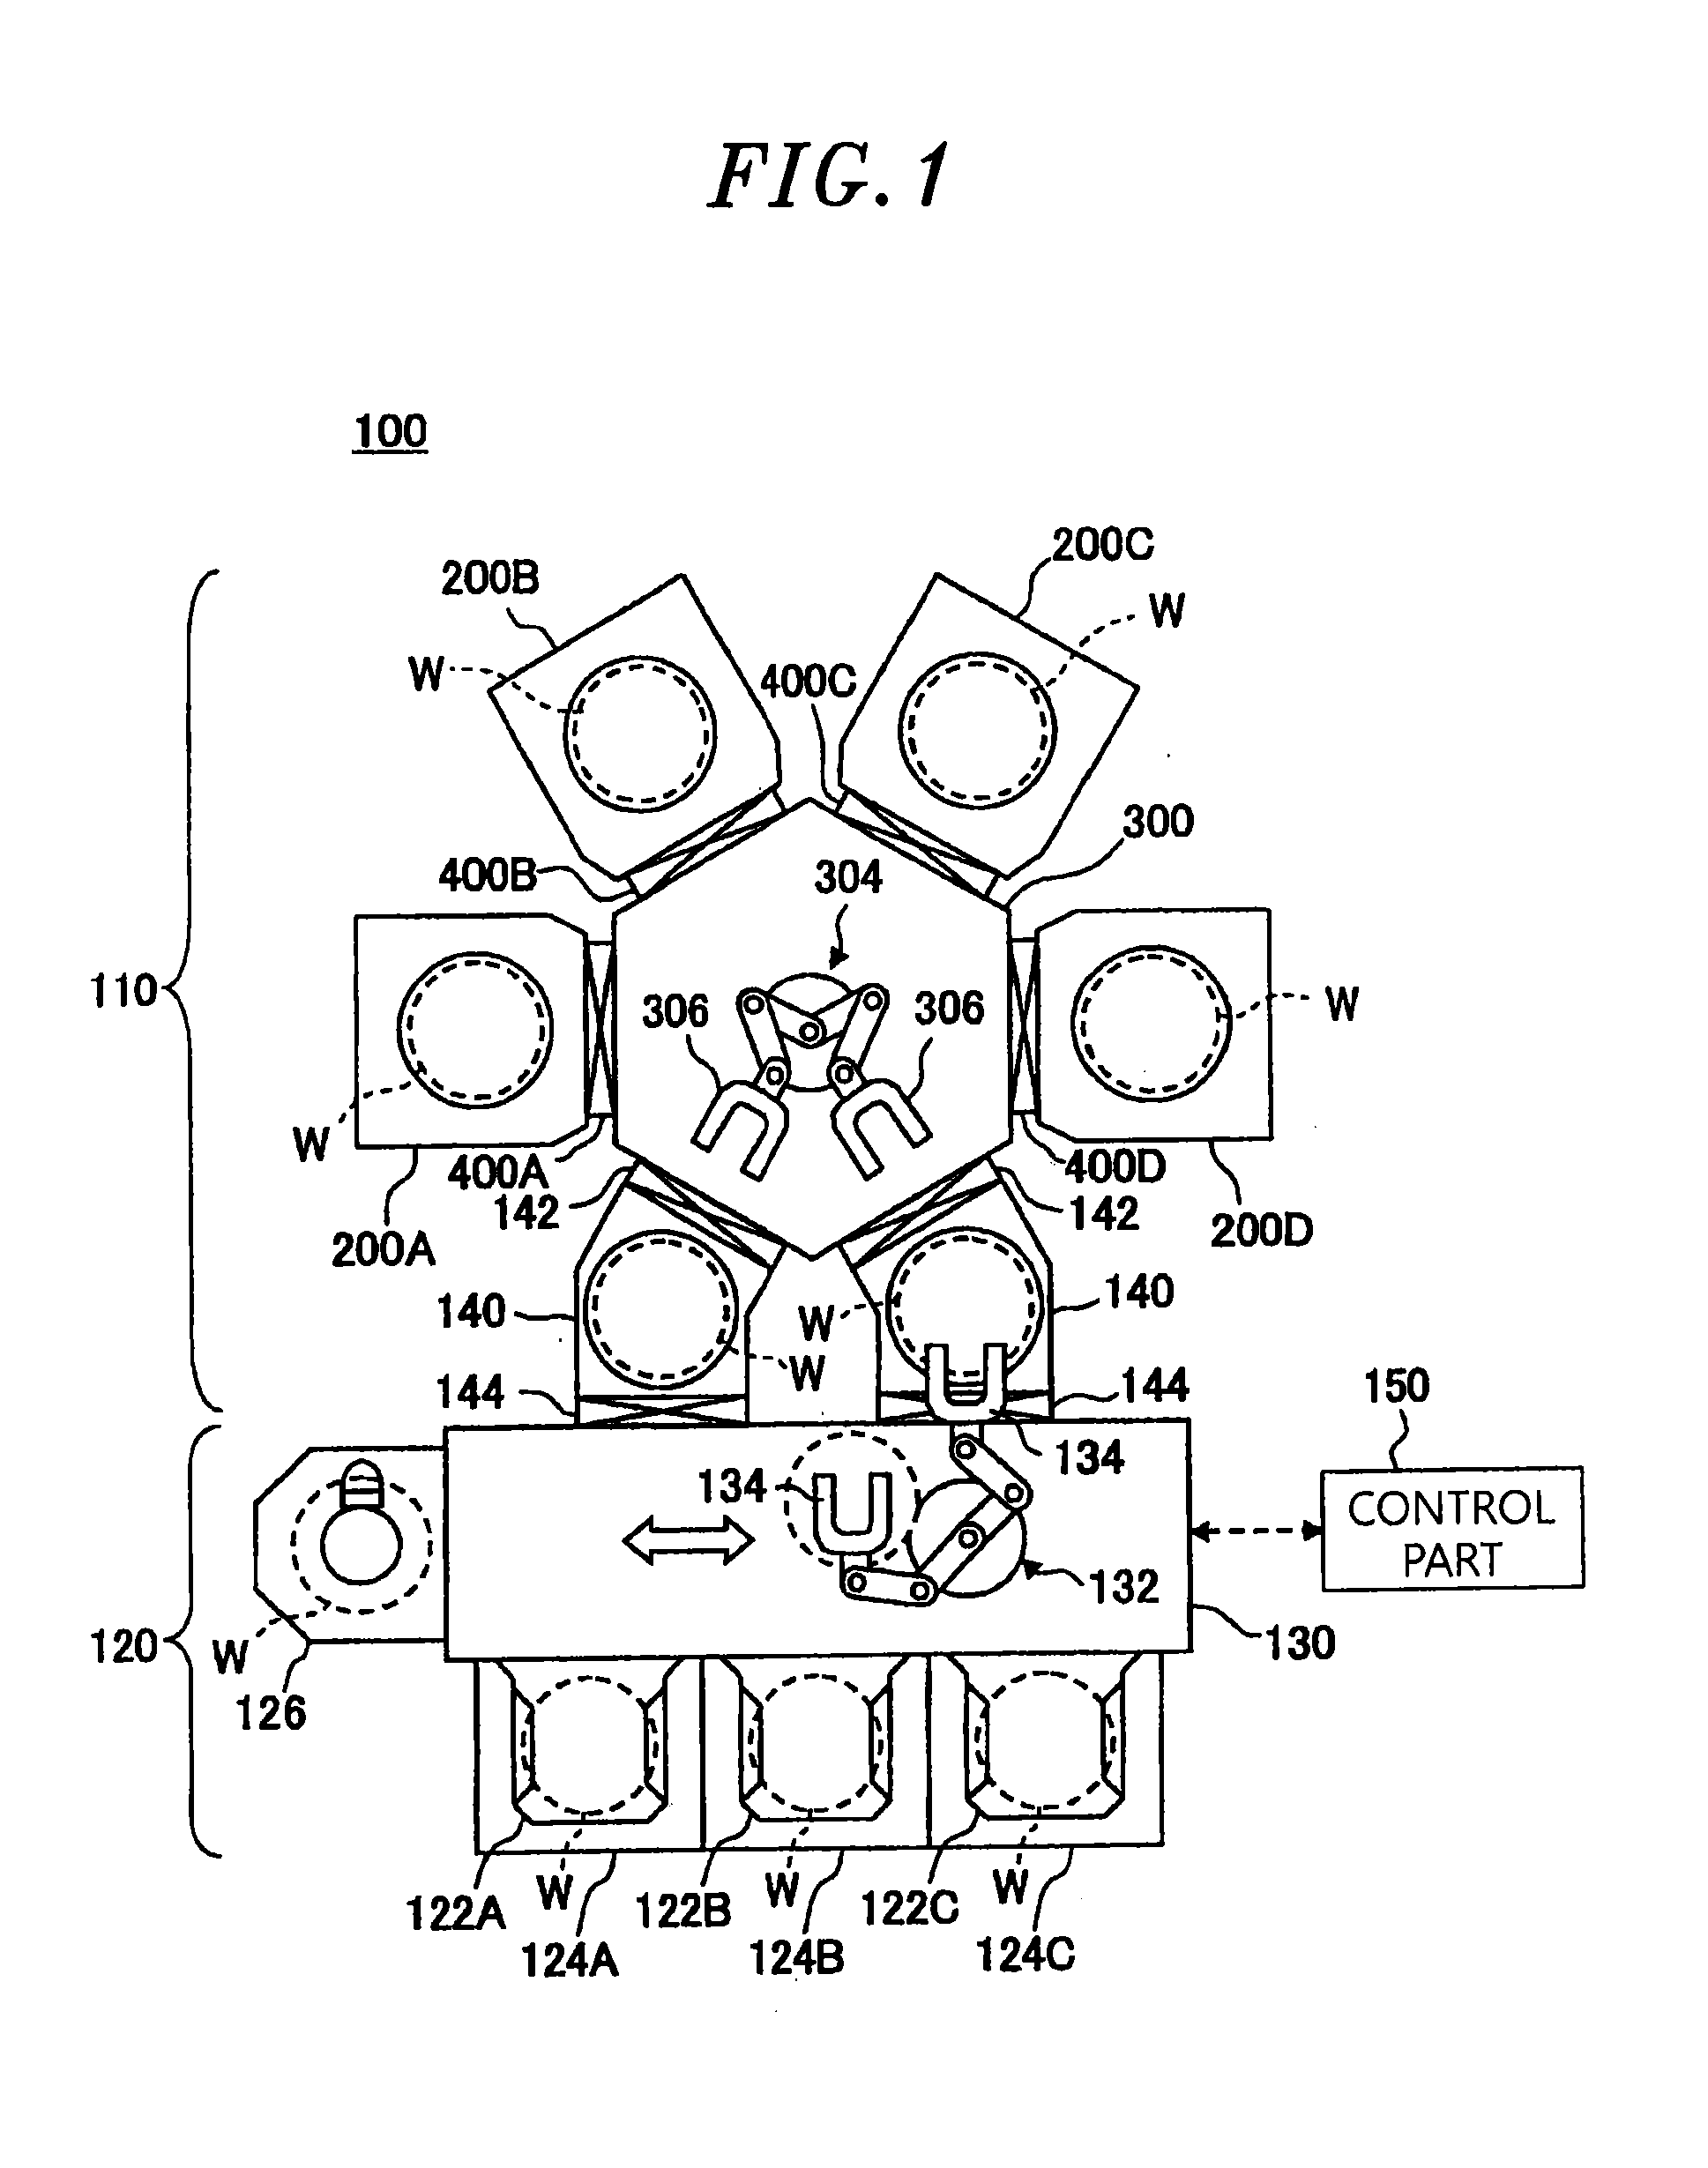 Gate valve unit, substrate processing device and substrate processing method thereof